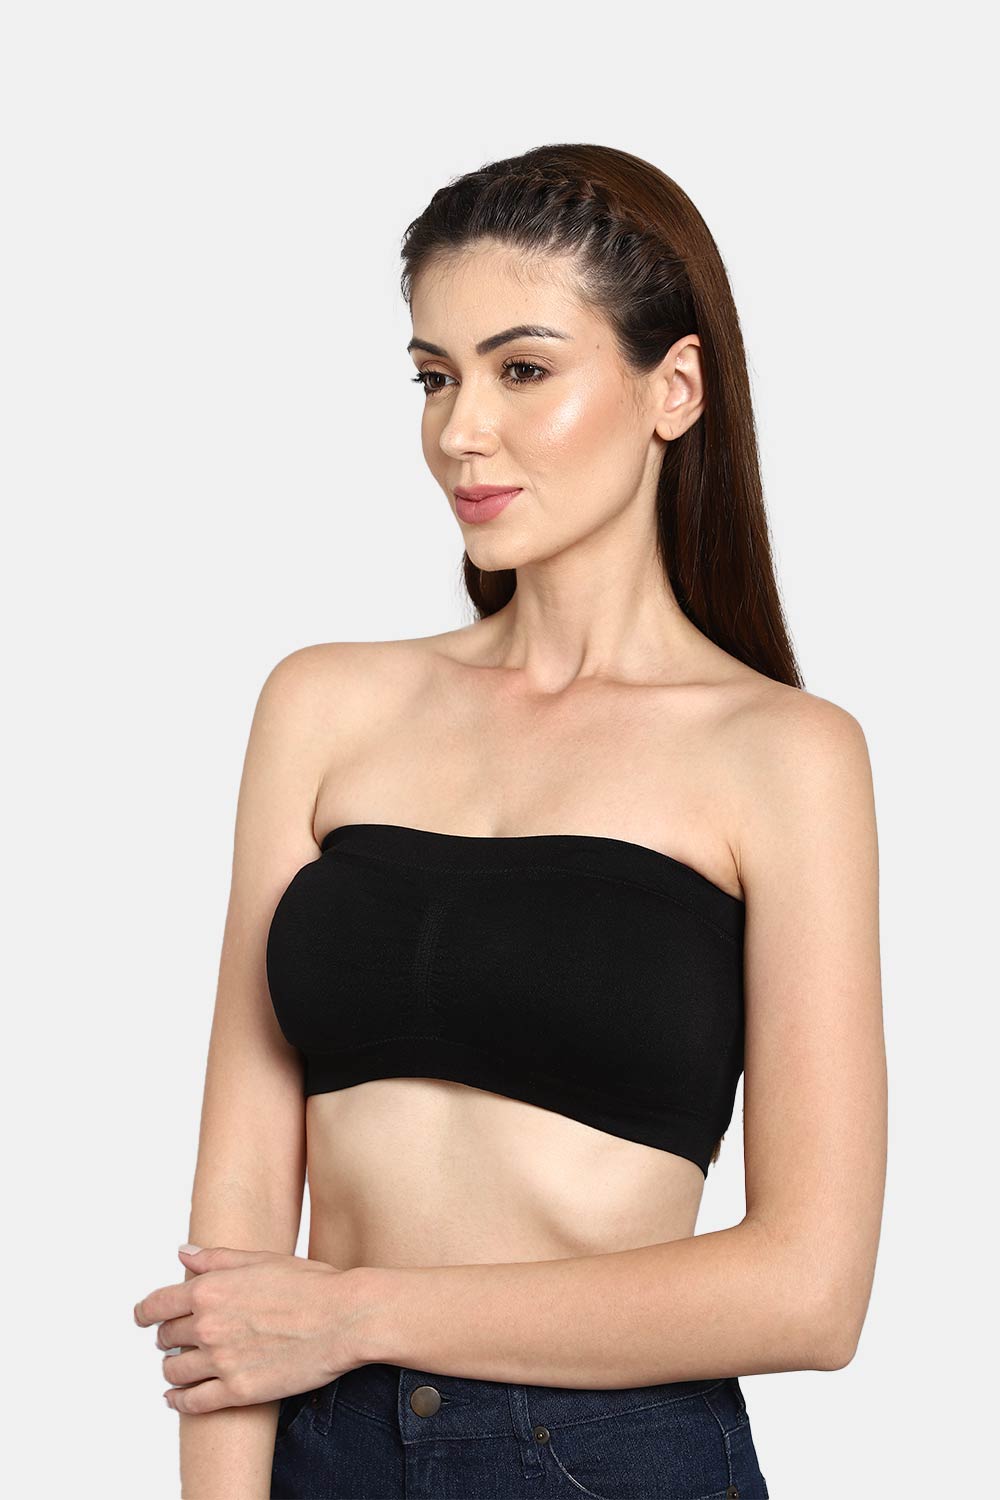 Double Layers Plus Size Strapless Bra Bandeau Tube Removable Padded Top  Stretchy Seamless Bandeau Bra Boob Crop Spaghetti Strap Sb